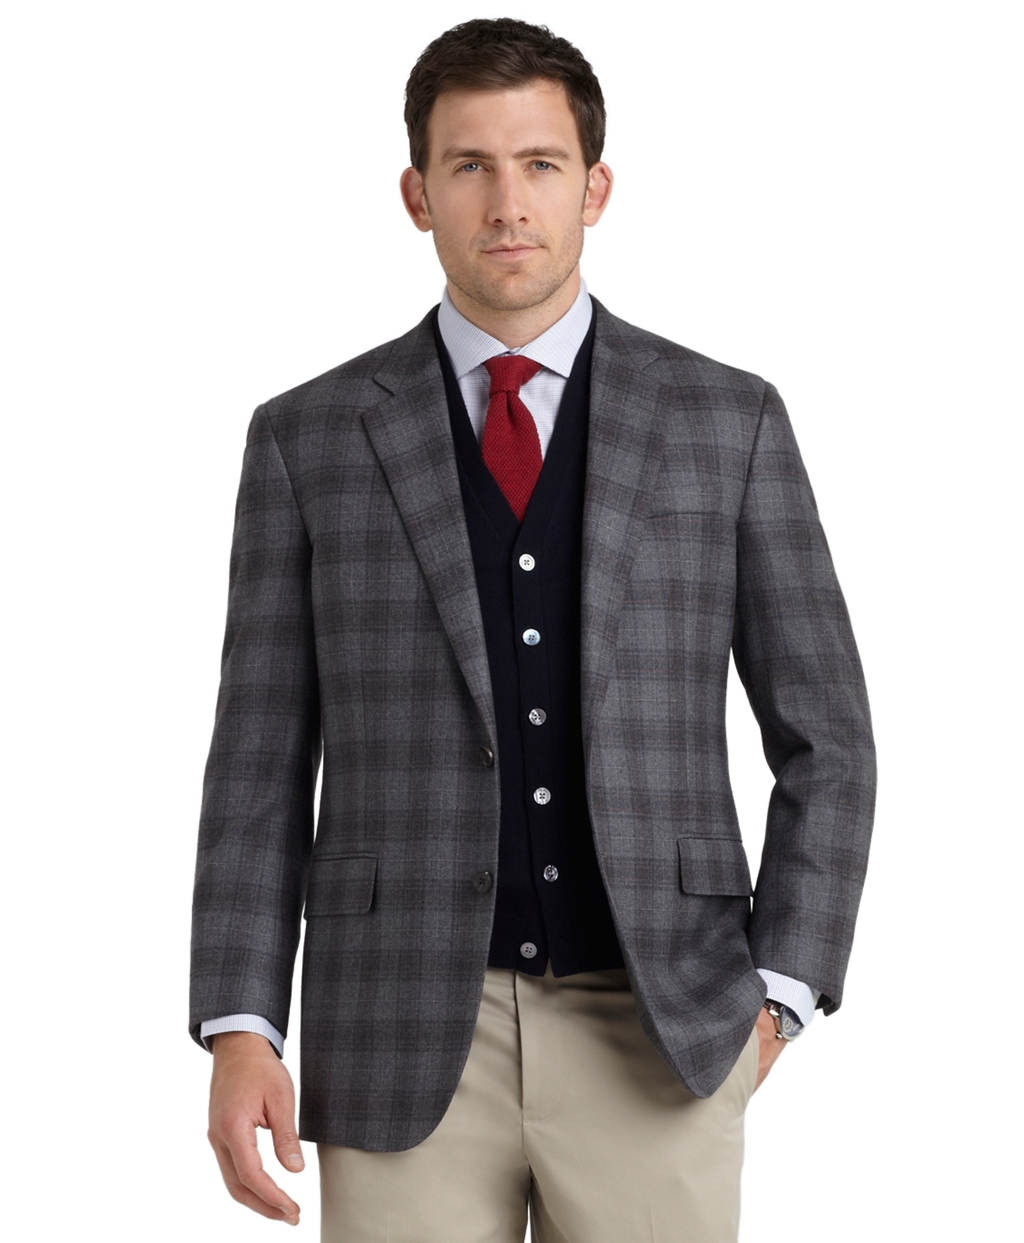 Lyst - Brooks Brothers Madison Fit Plaid Sport Coat in Gray for Men